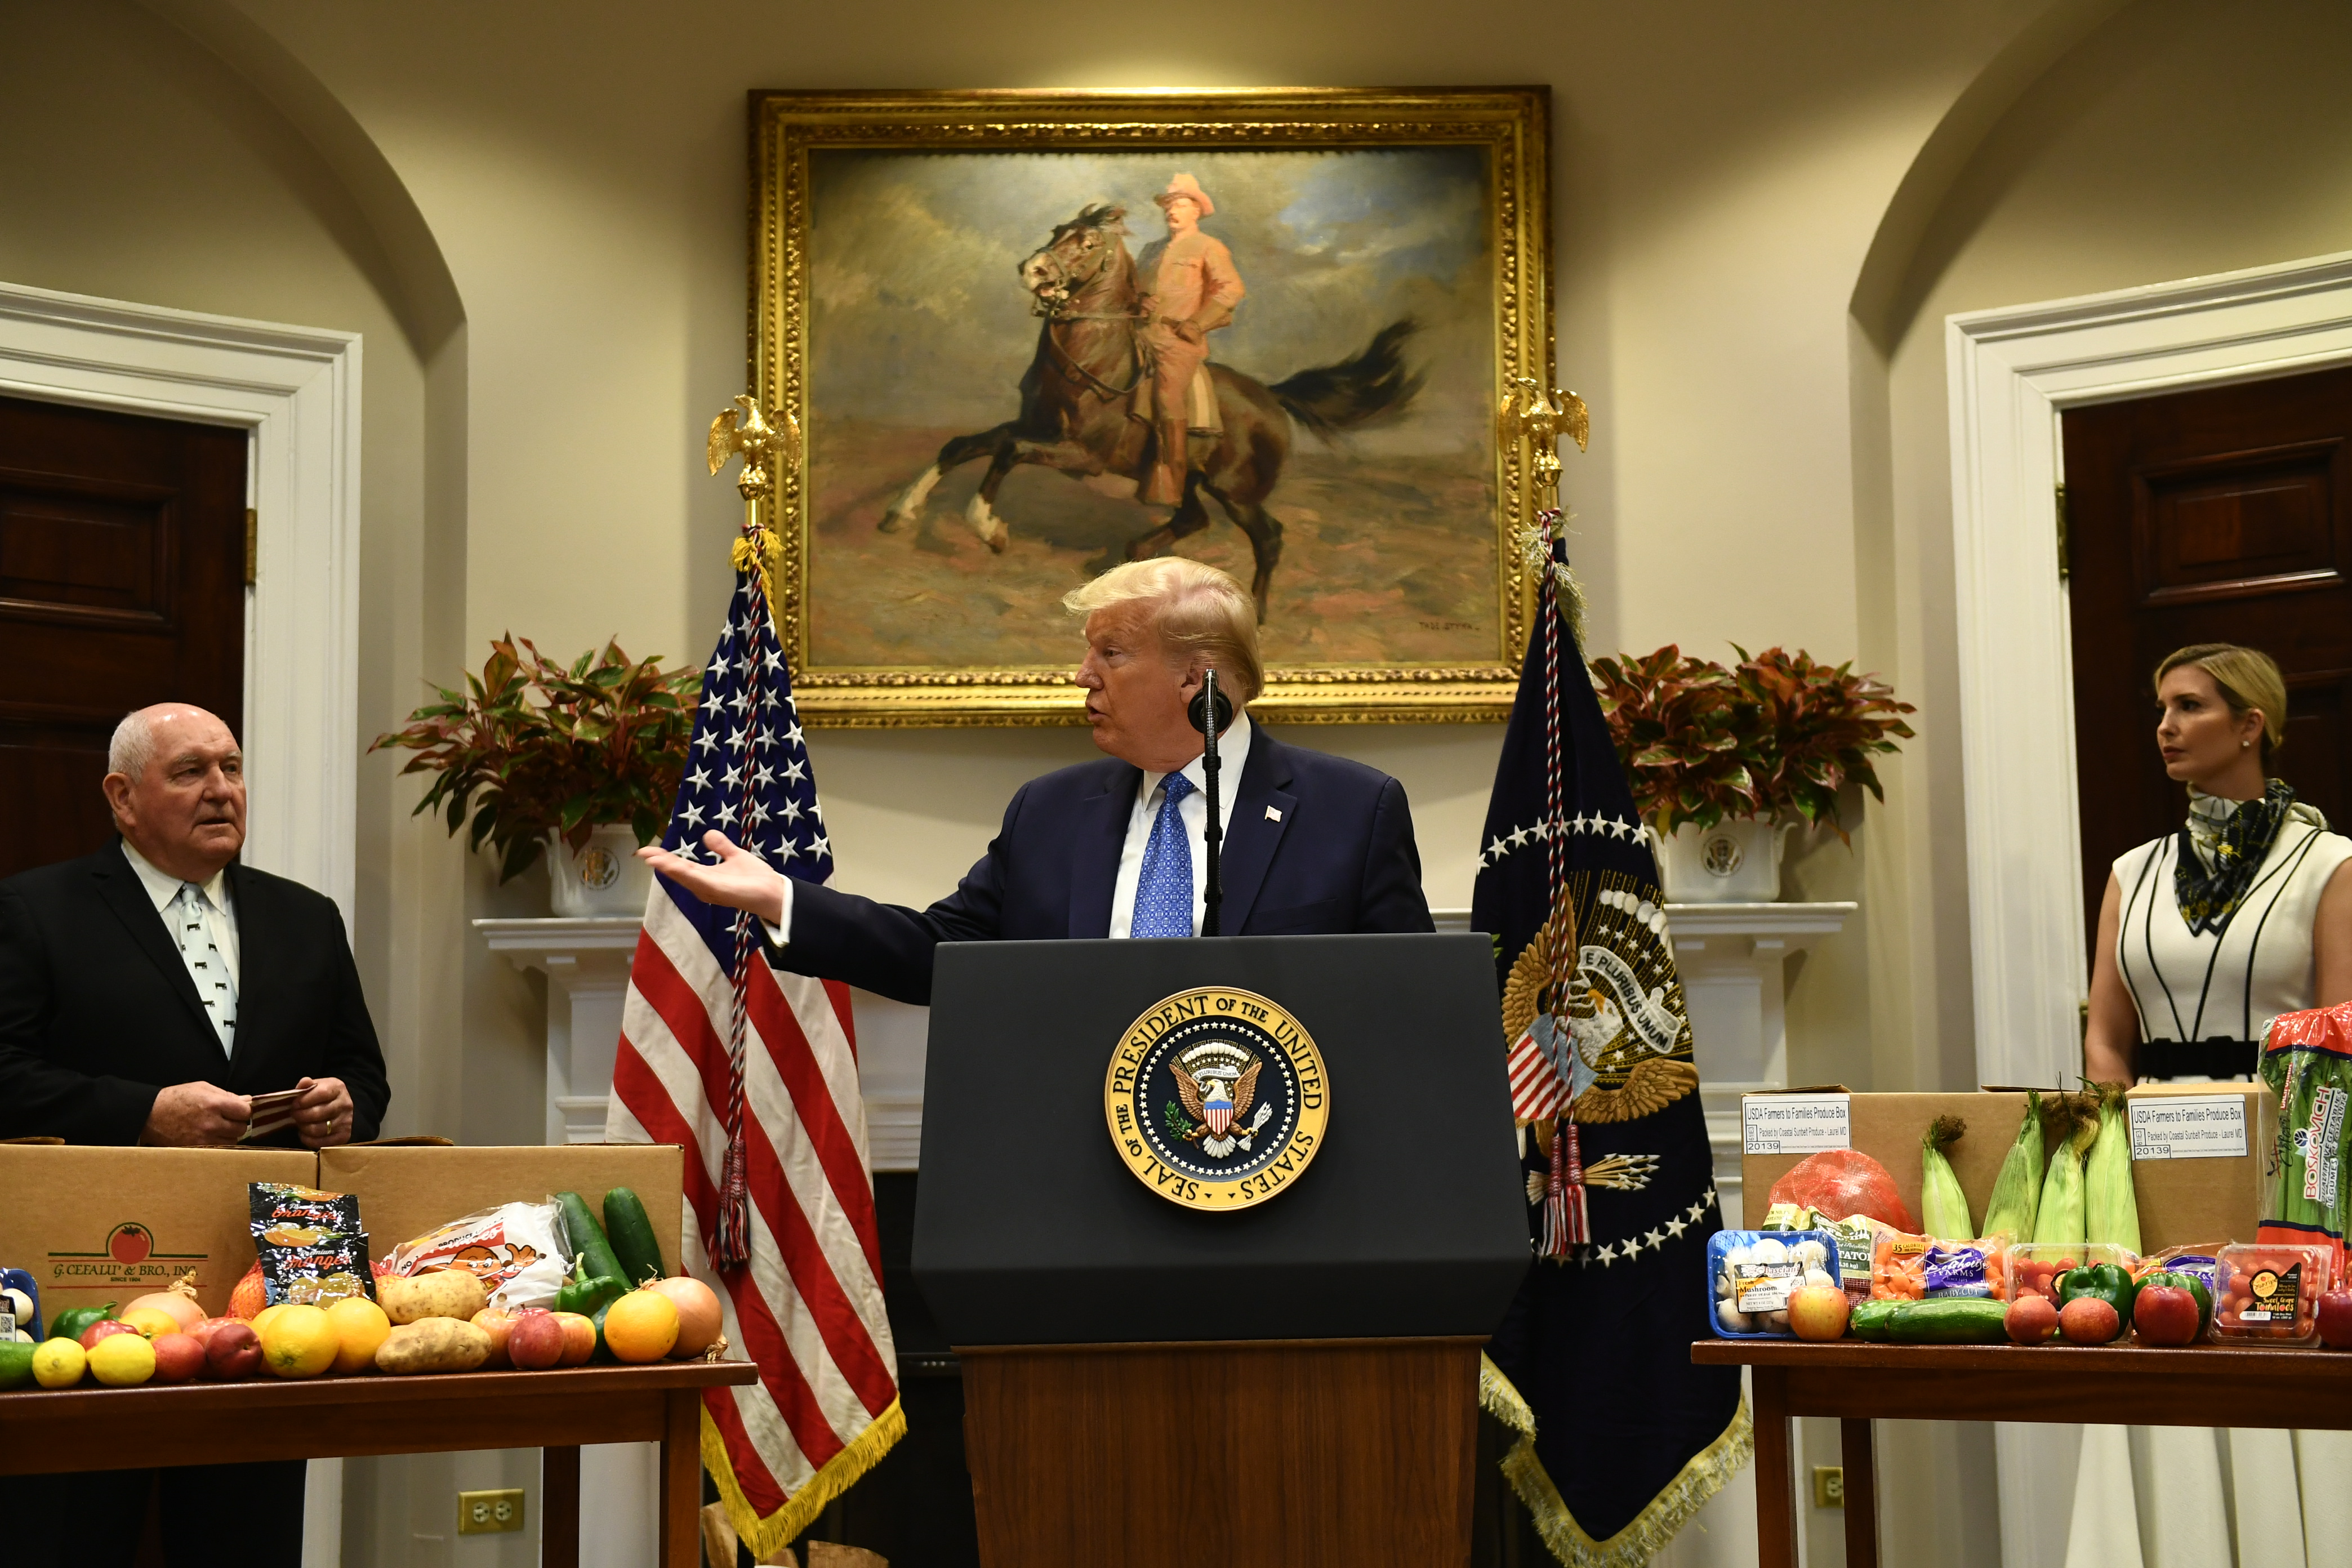 US President Donald Trump, with Senior Advisor to the President Ivanka Trump (R) and Agriculture Secretary Sonny Perdue, speaks about the food supply chain during the coronavirus pandemic, in the Roosevelt Room of the White House on May 19, 2020, in Washington, DC.  (Photo by BRENDAN SMIALOWSKI/AFP via Getty Images)